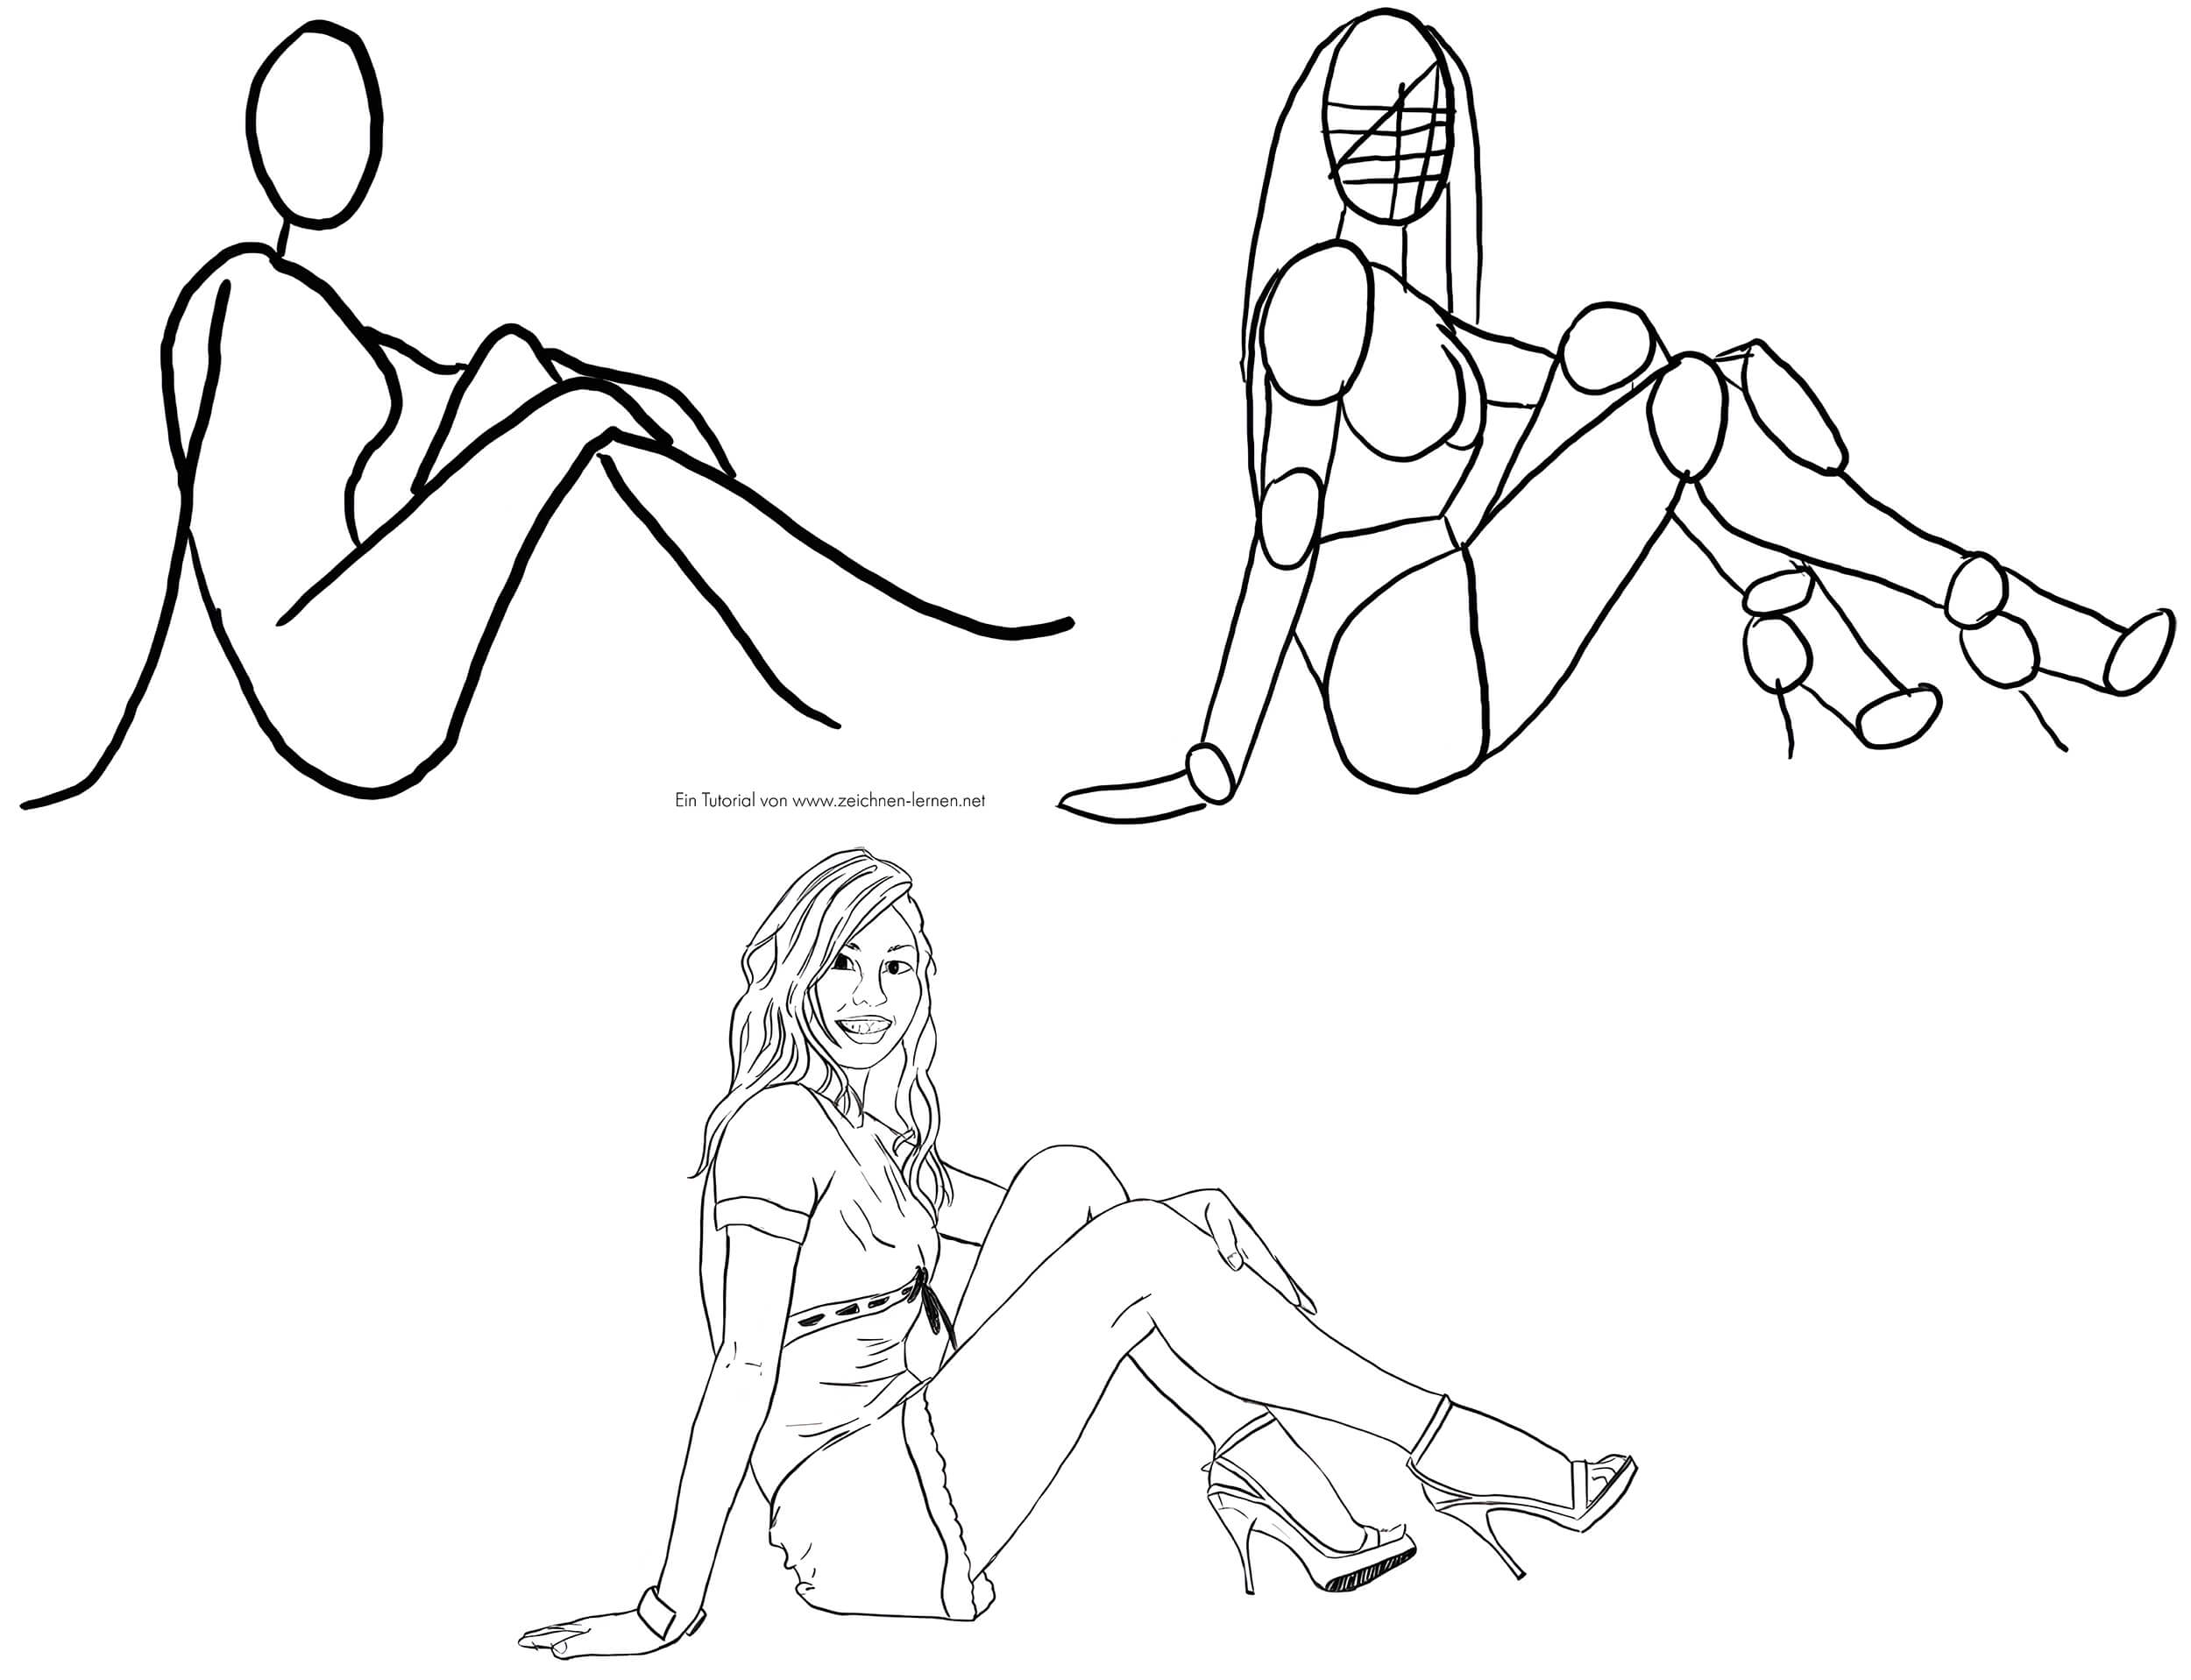 Drawing Poses Reference Guide: How to Find Fun Ideas - NFT Art with Lauren  McDonagh-Pereira Photography